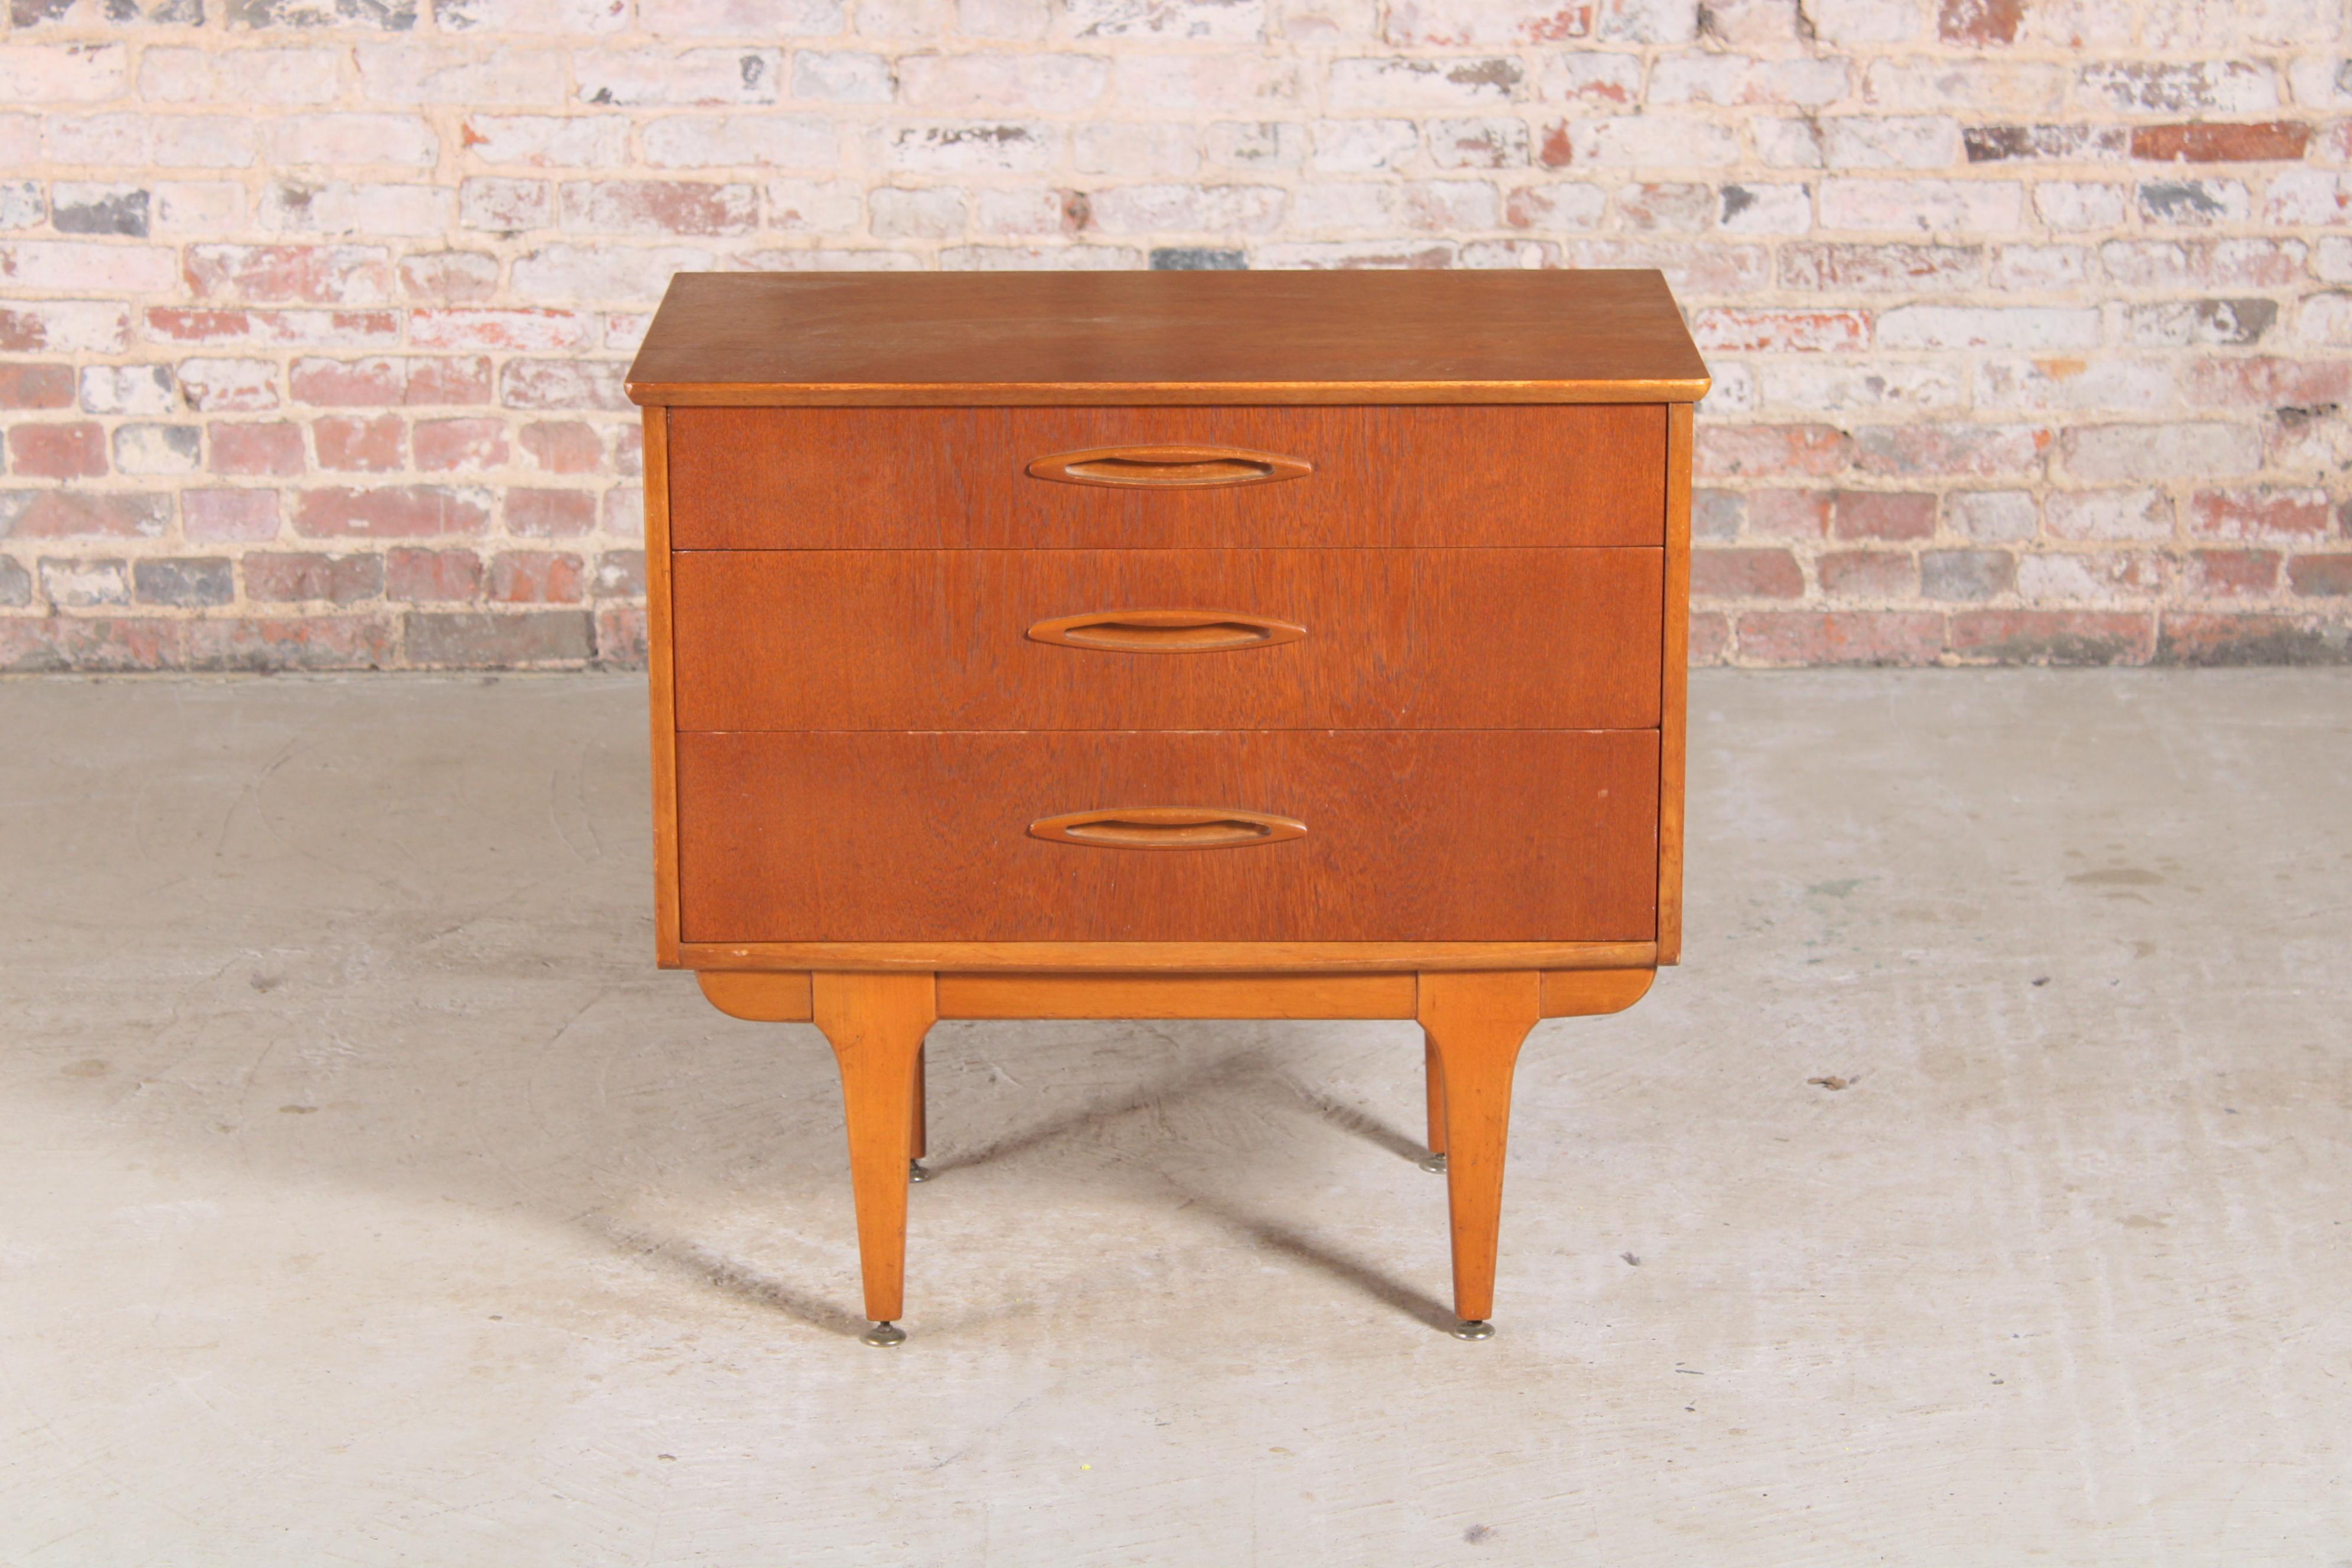 Mid Century metamorphic chest of drawers by Jentique, England, circa 1960s. The top pulls out to reveal a storage compartment.

Dimensions: 78 W x 45 D x 74 H cm.